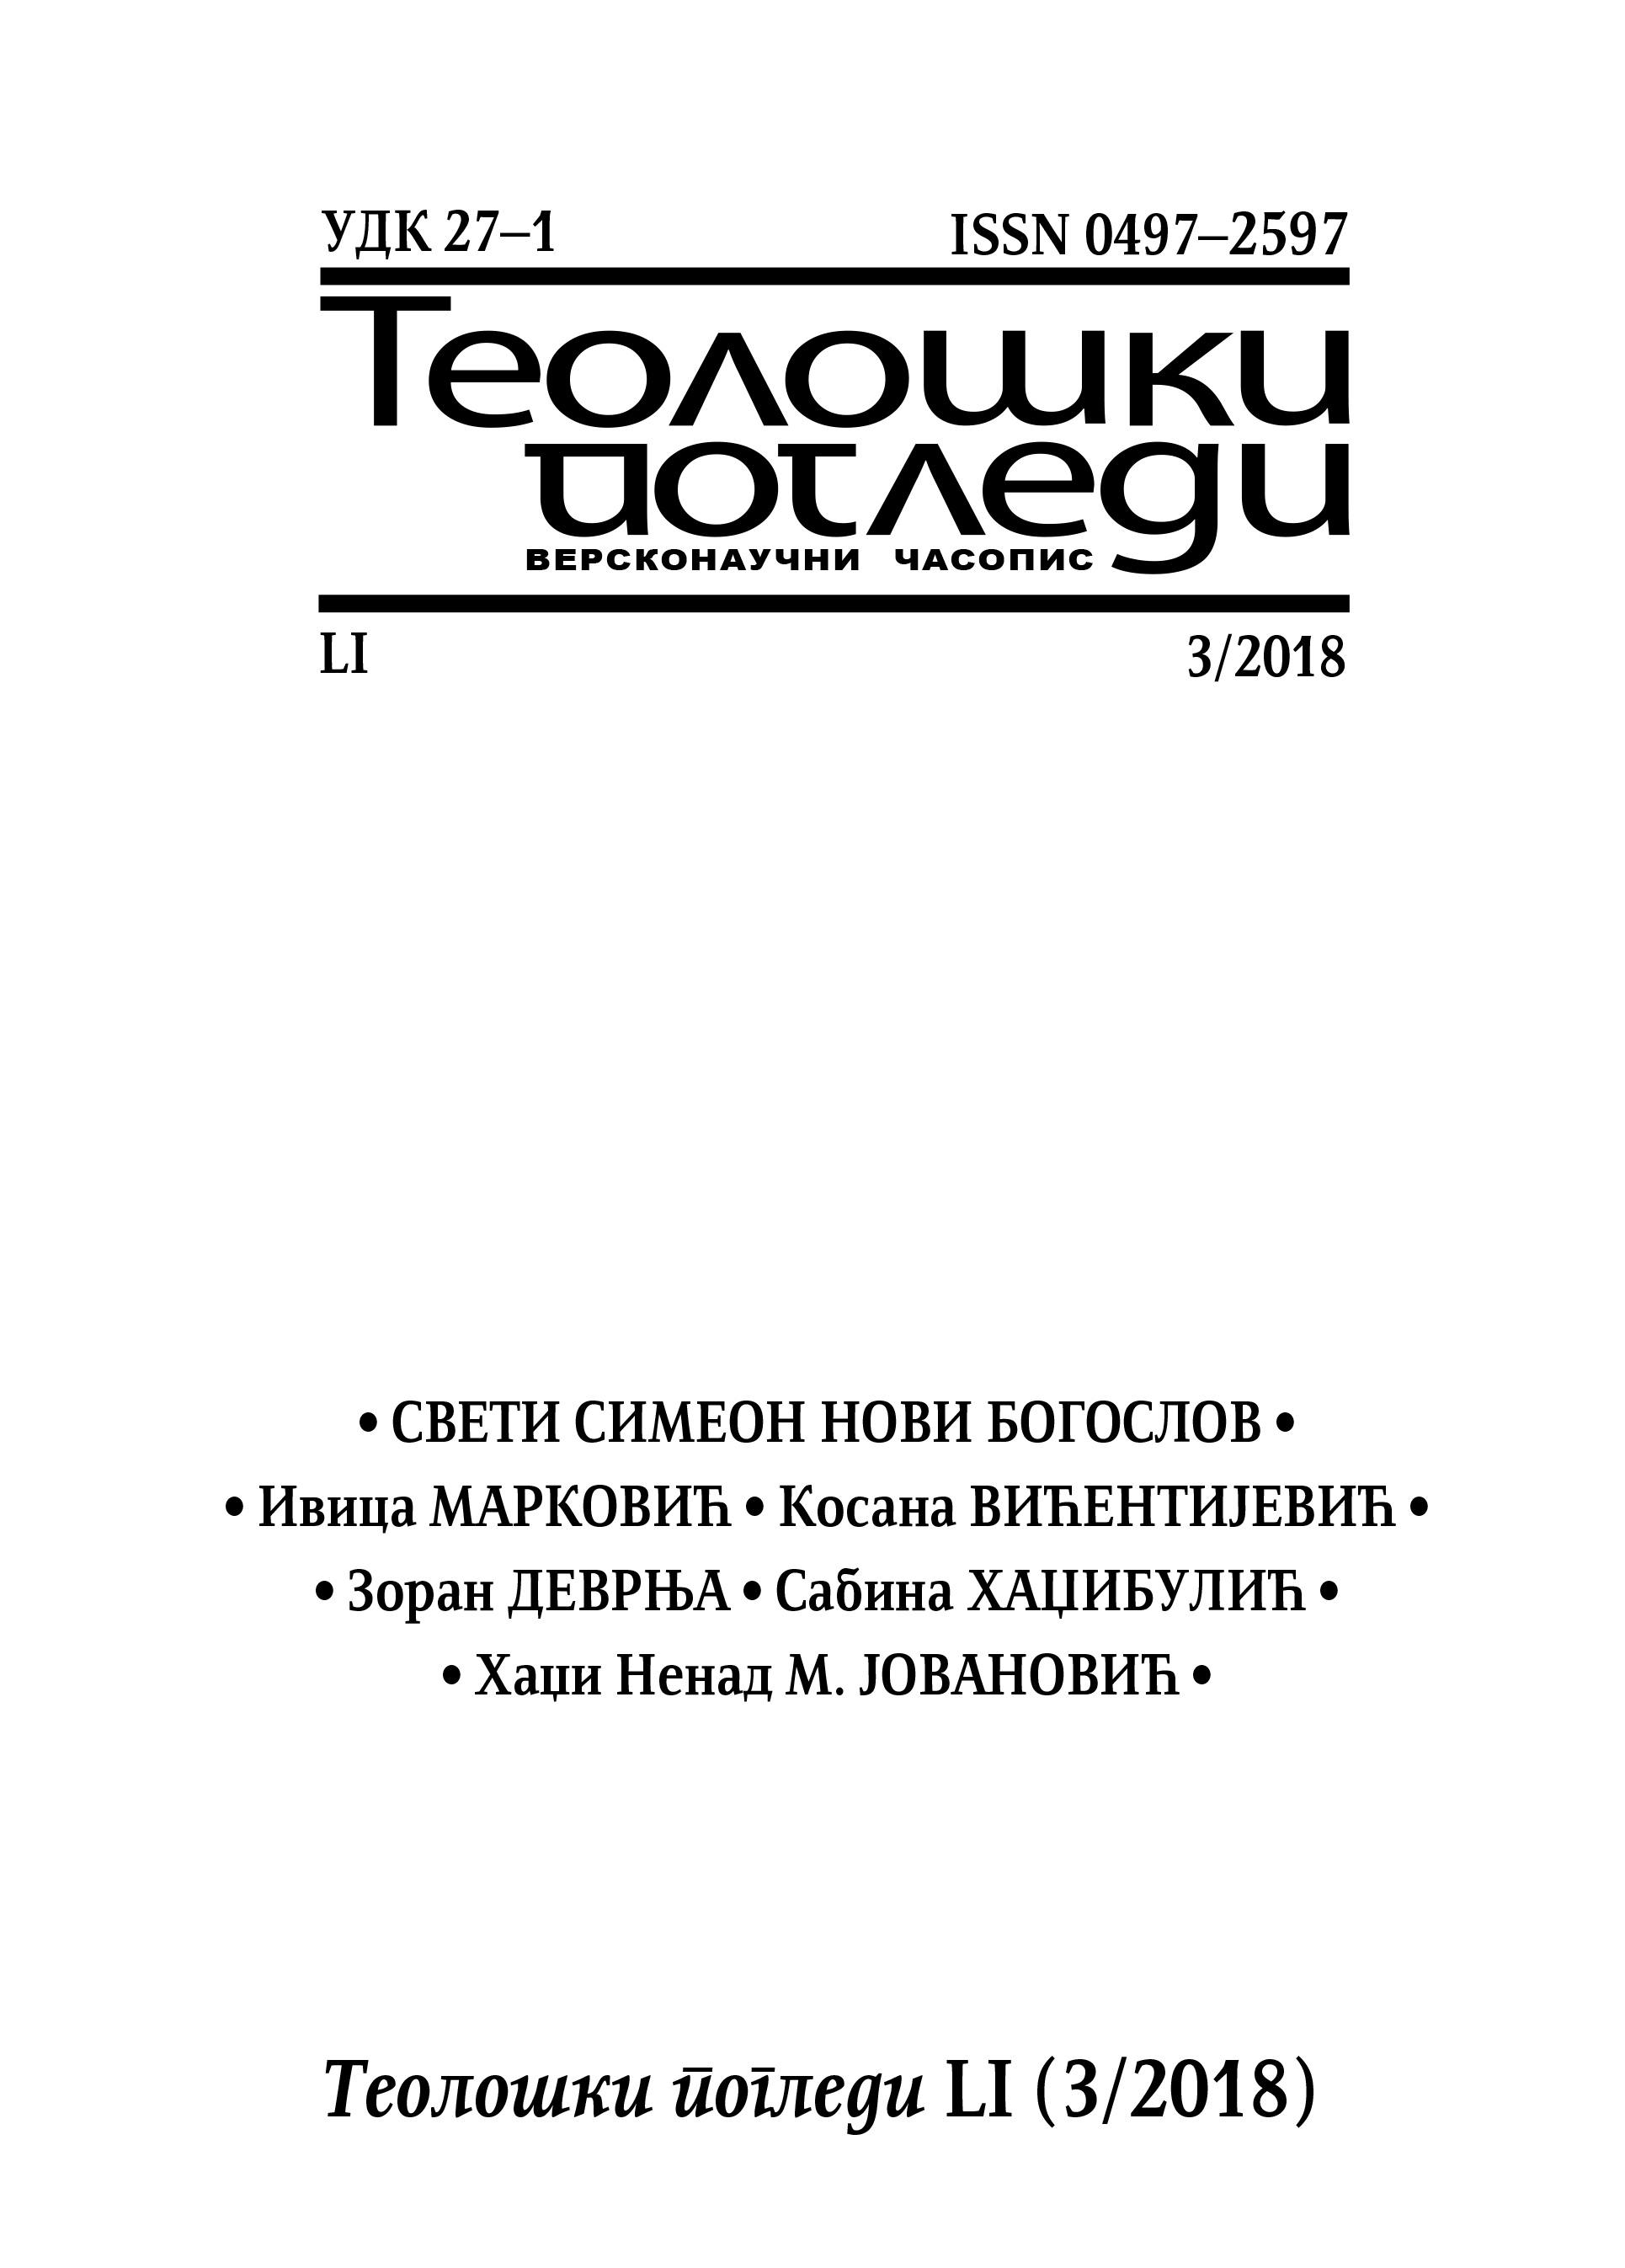 The Context of the Genesis of Visual Art Aesthetics in Russian Religious Philosophy from the End of the 19th and the Beginning of the 20th Century Cover Image